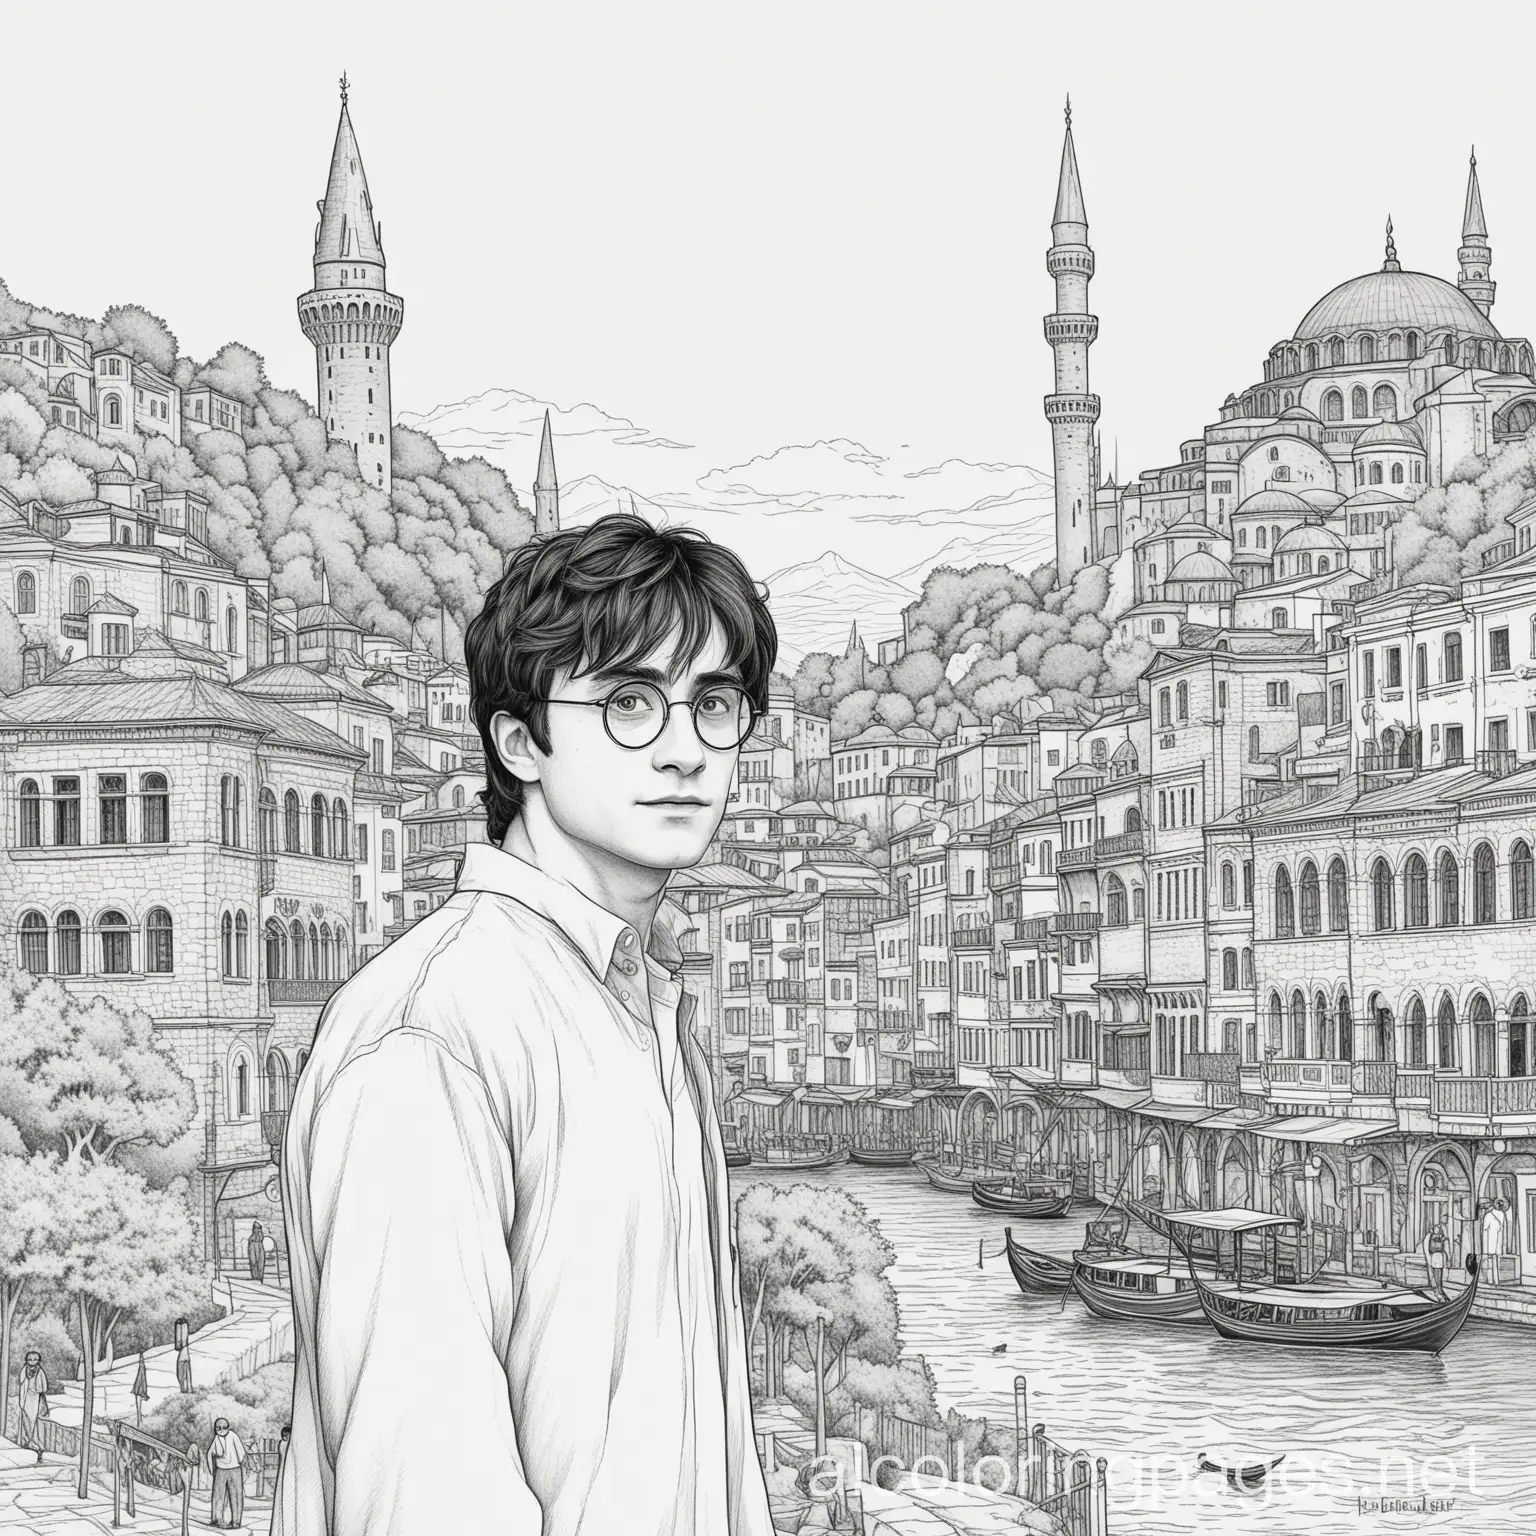 harry potter in istanbul, Coloring Page, black and white, line art, white background, Simplicity, Ample White Space. The background of the coloring page is plain white to make it easy for young children to color within the lines. The outlines of all the subjects are easy to distinguish, making it simple for kids to color without too much difficulty